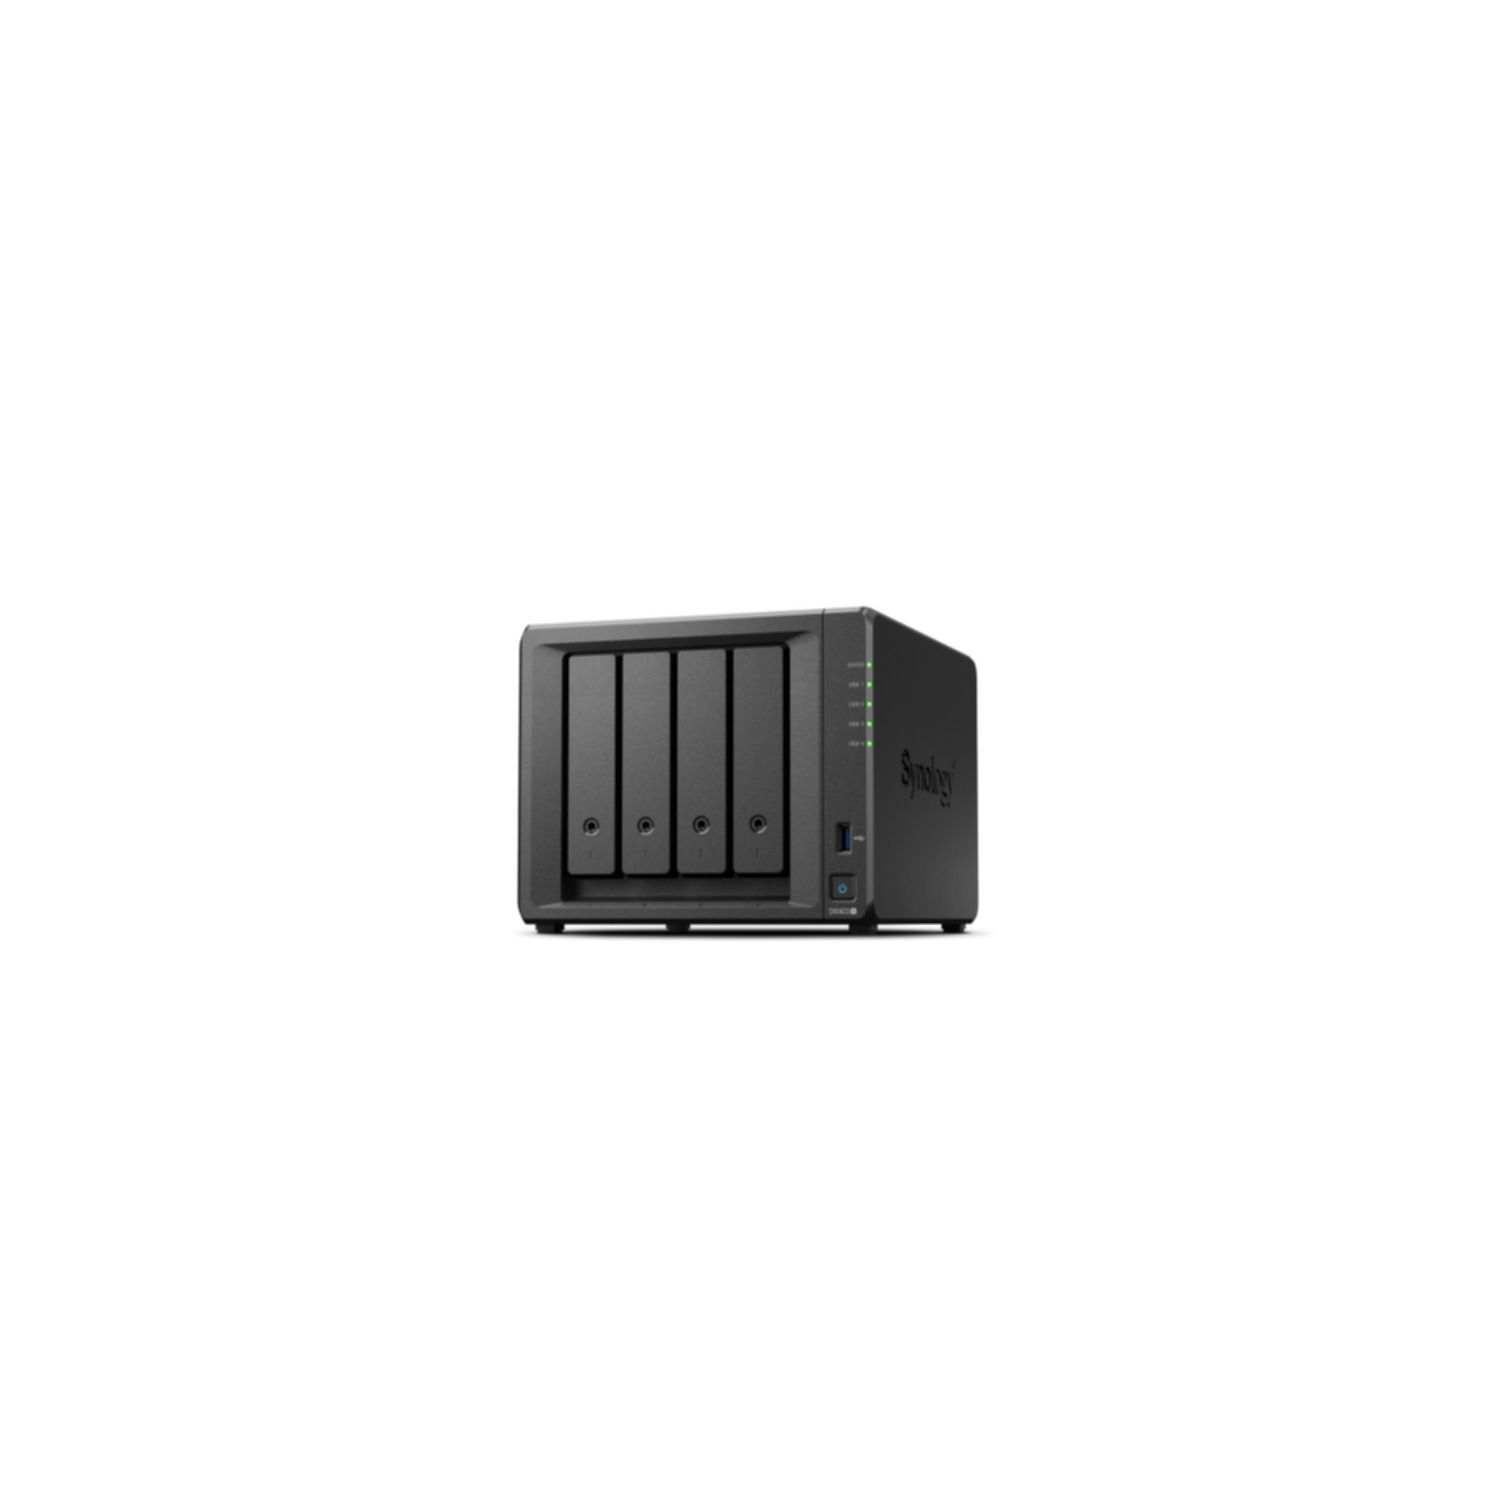 SYNOLOGY DS923+ 0 TB extern 3,5 Zoll